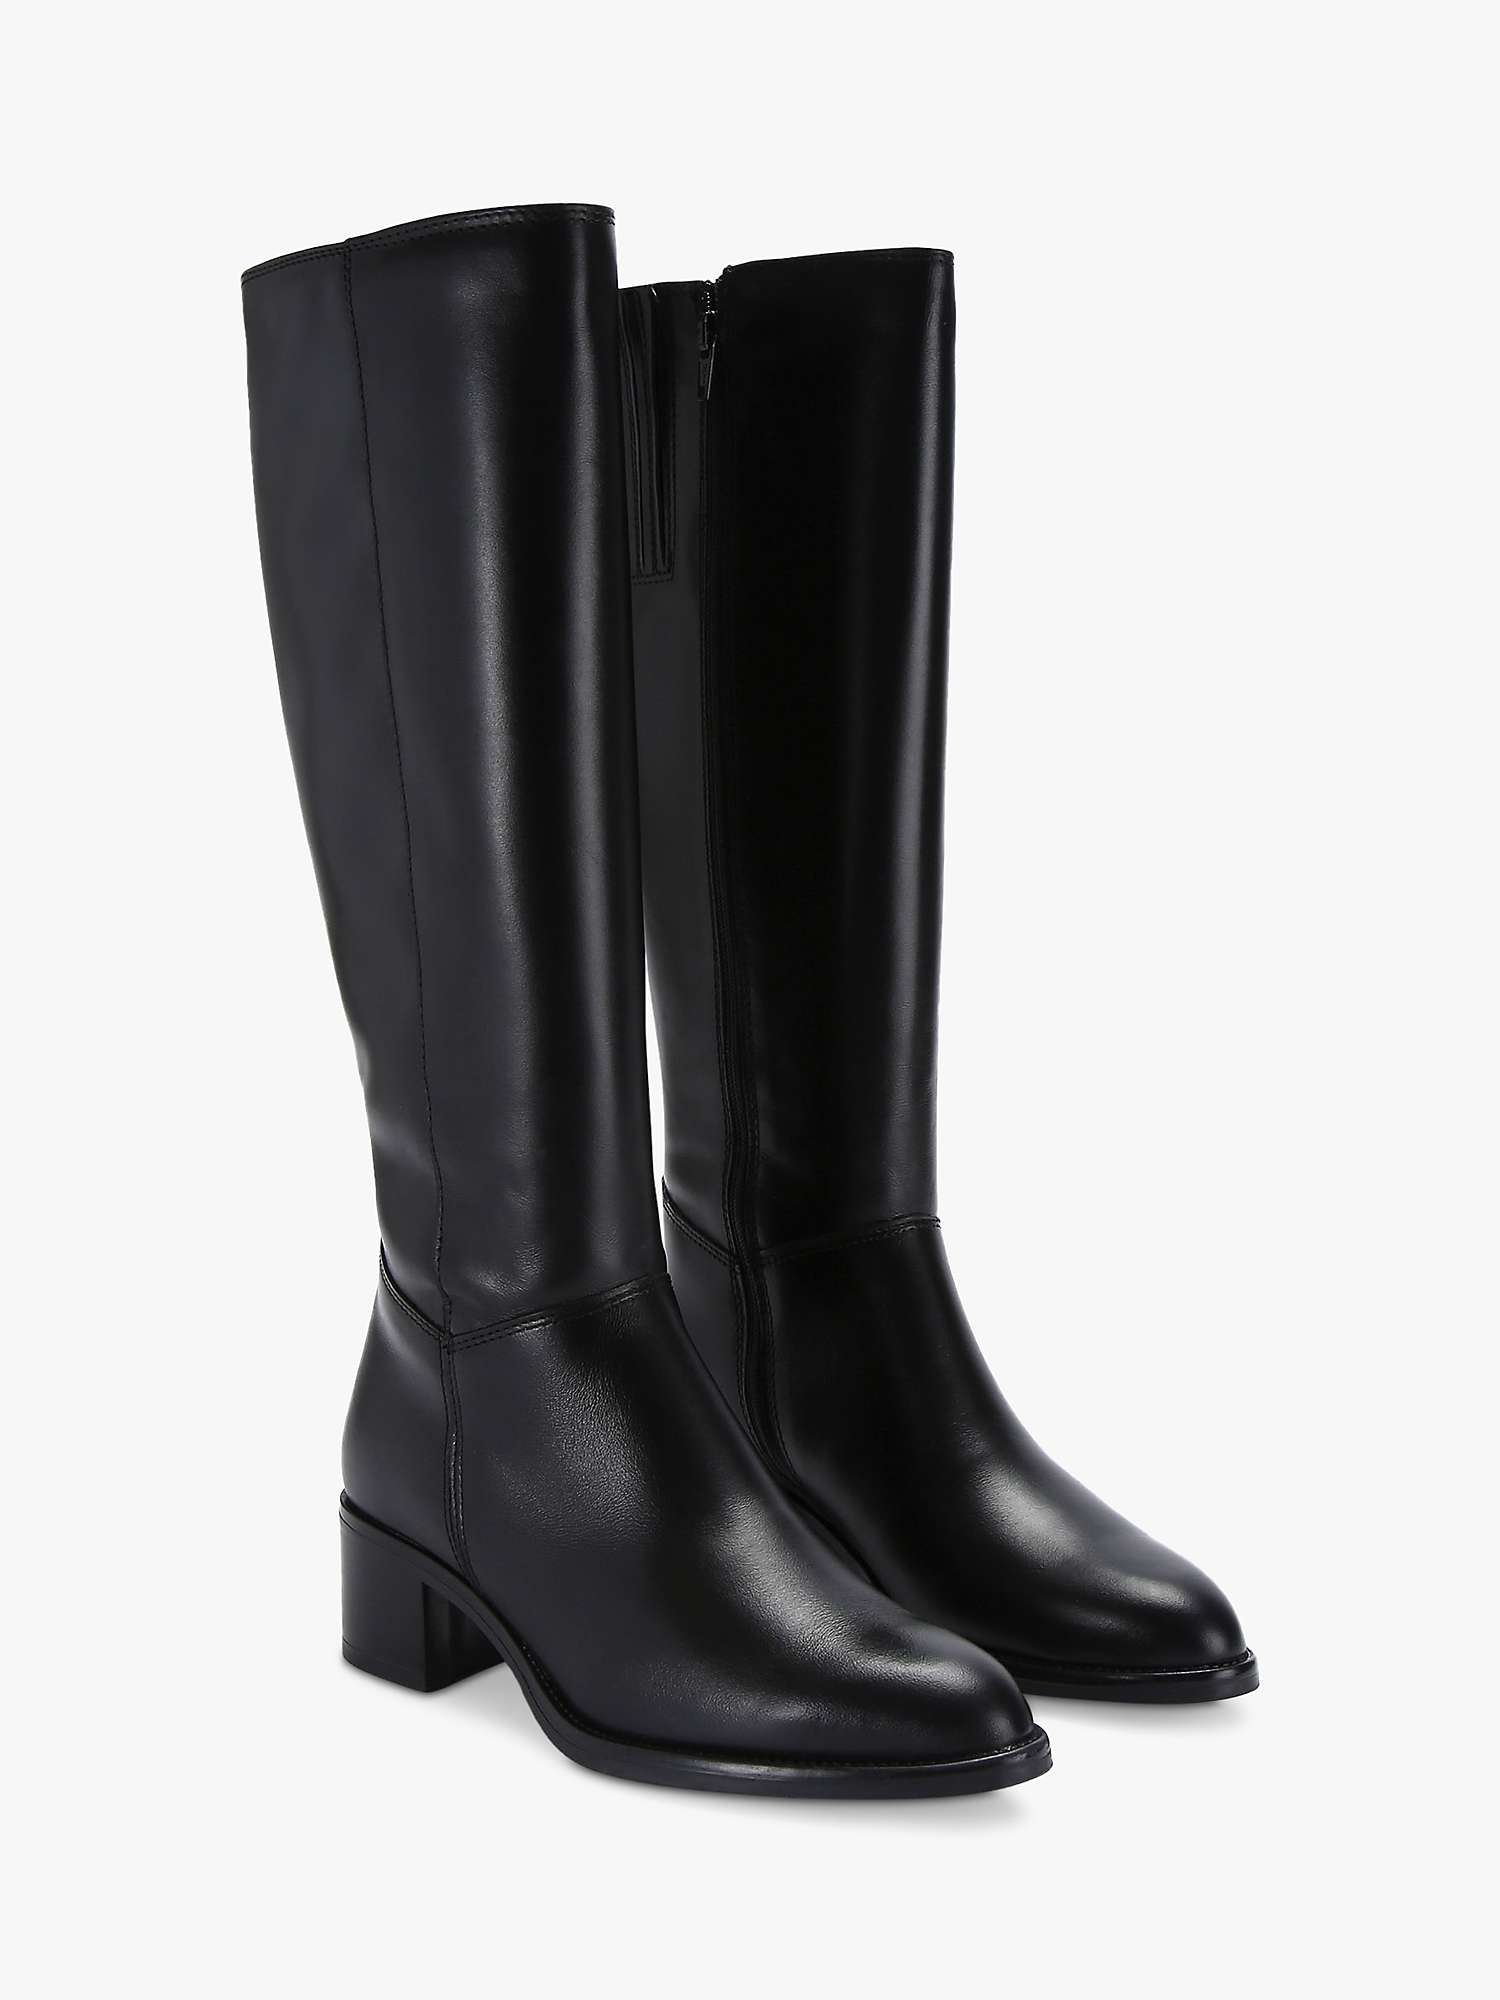 Carvela Spectate Leather Calf High Boots, Black at John Lewis & Partners